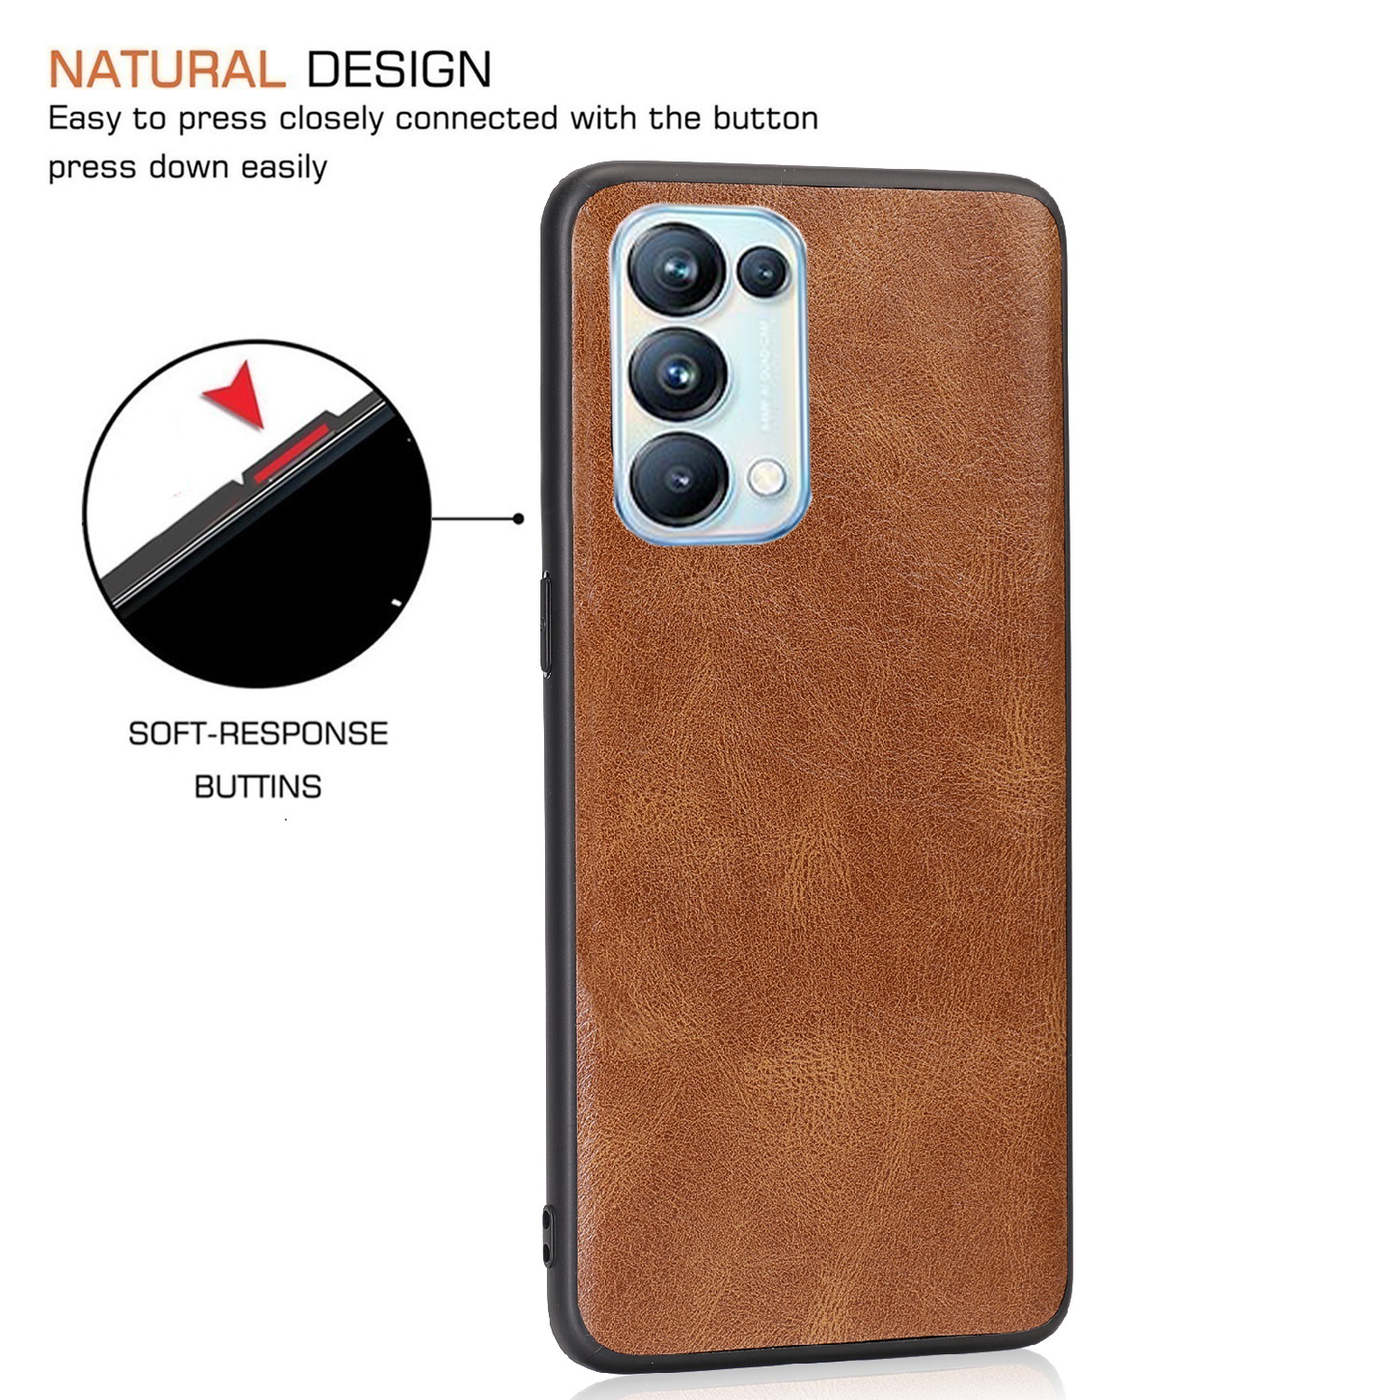 Excelsior Premium PU Leather Back Cover Case For Oppo Reno 5 Pro